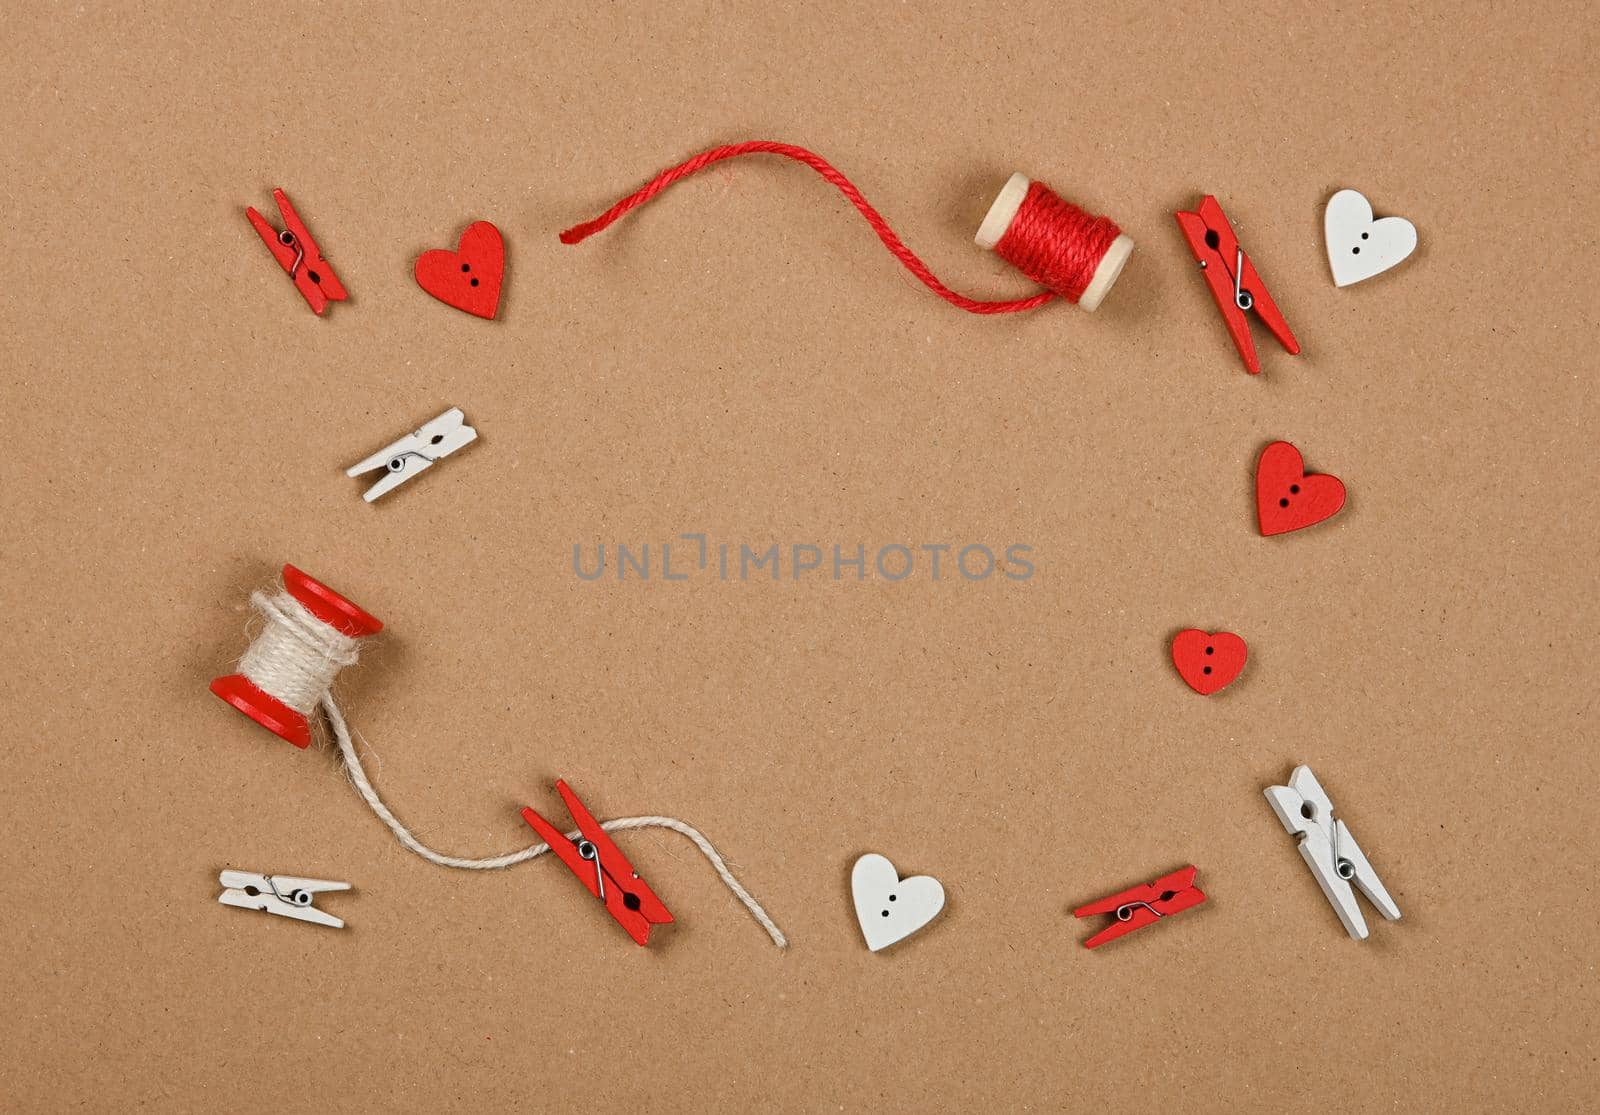 Frame of Valentine gift decorations, twine, clothespins and hearts over brown paper background, close up flat lay, elevated top view, directly above